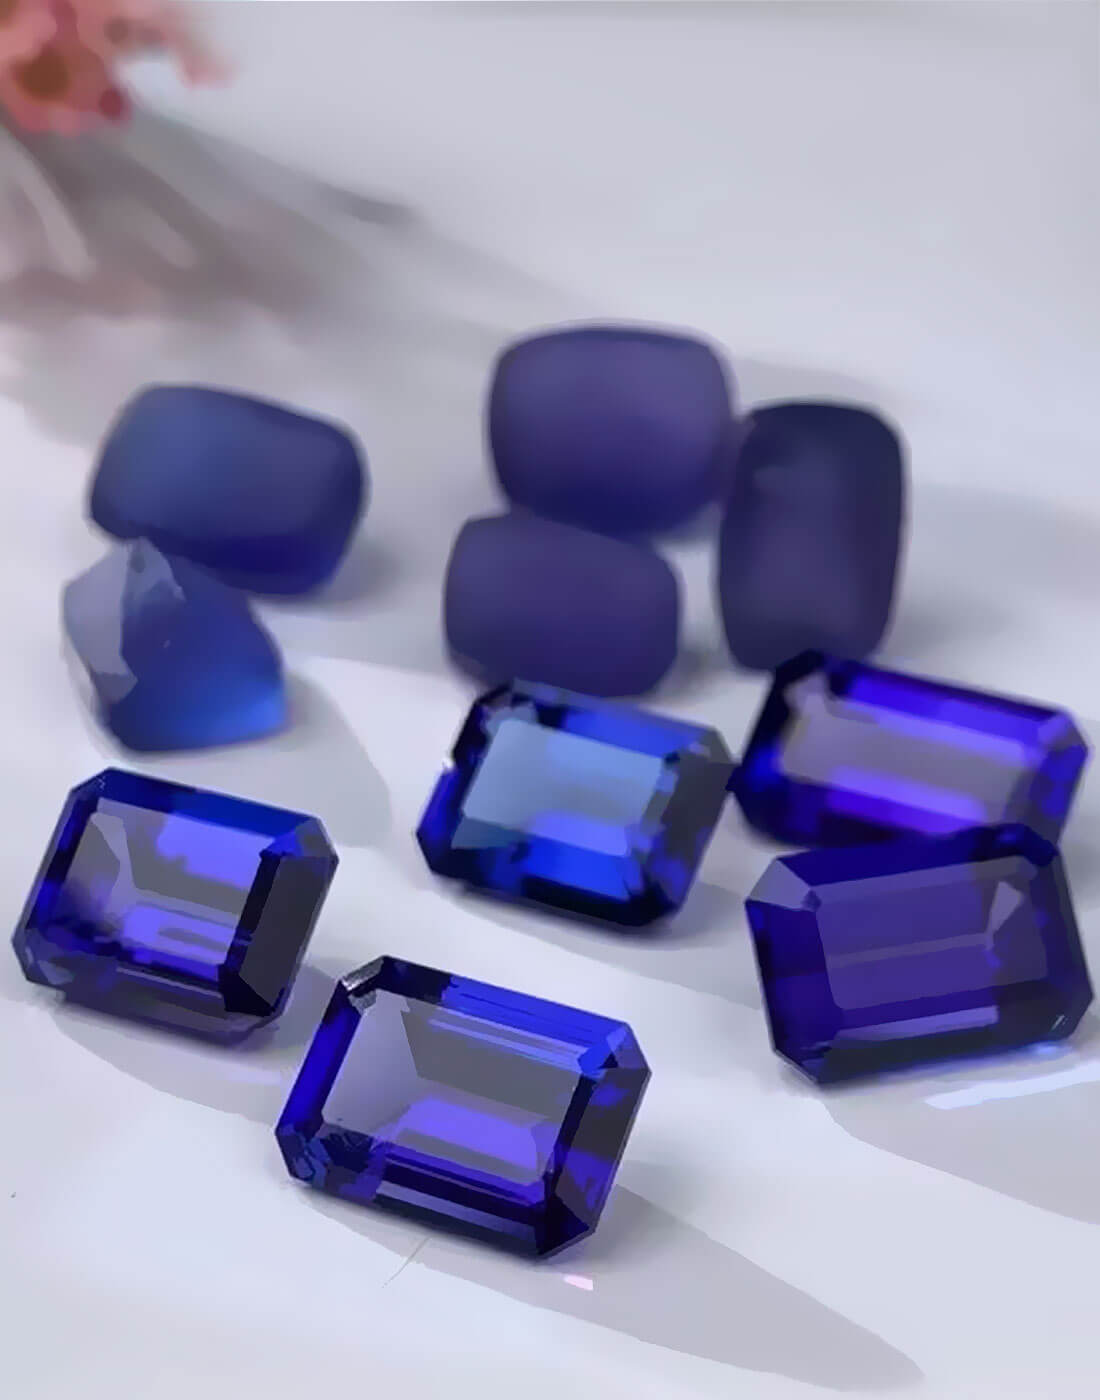 Shop loose Gemstones for all your custom fine and high jewelry by Modern Gem Jewelry®